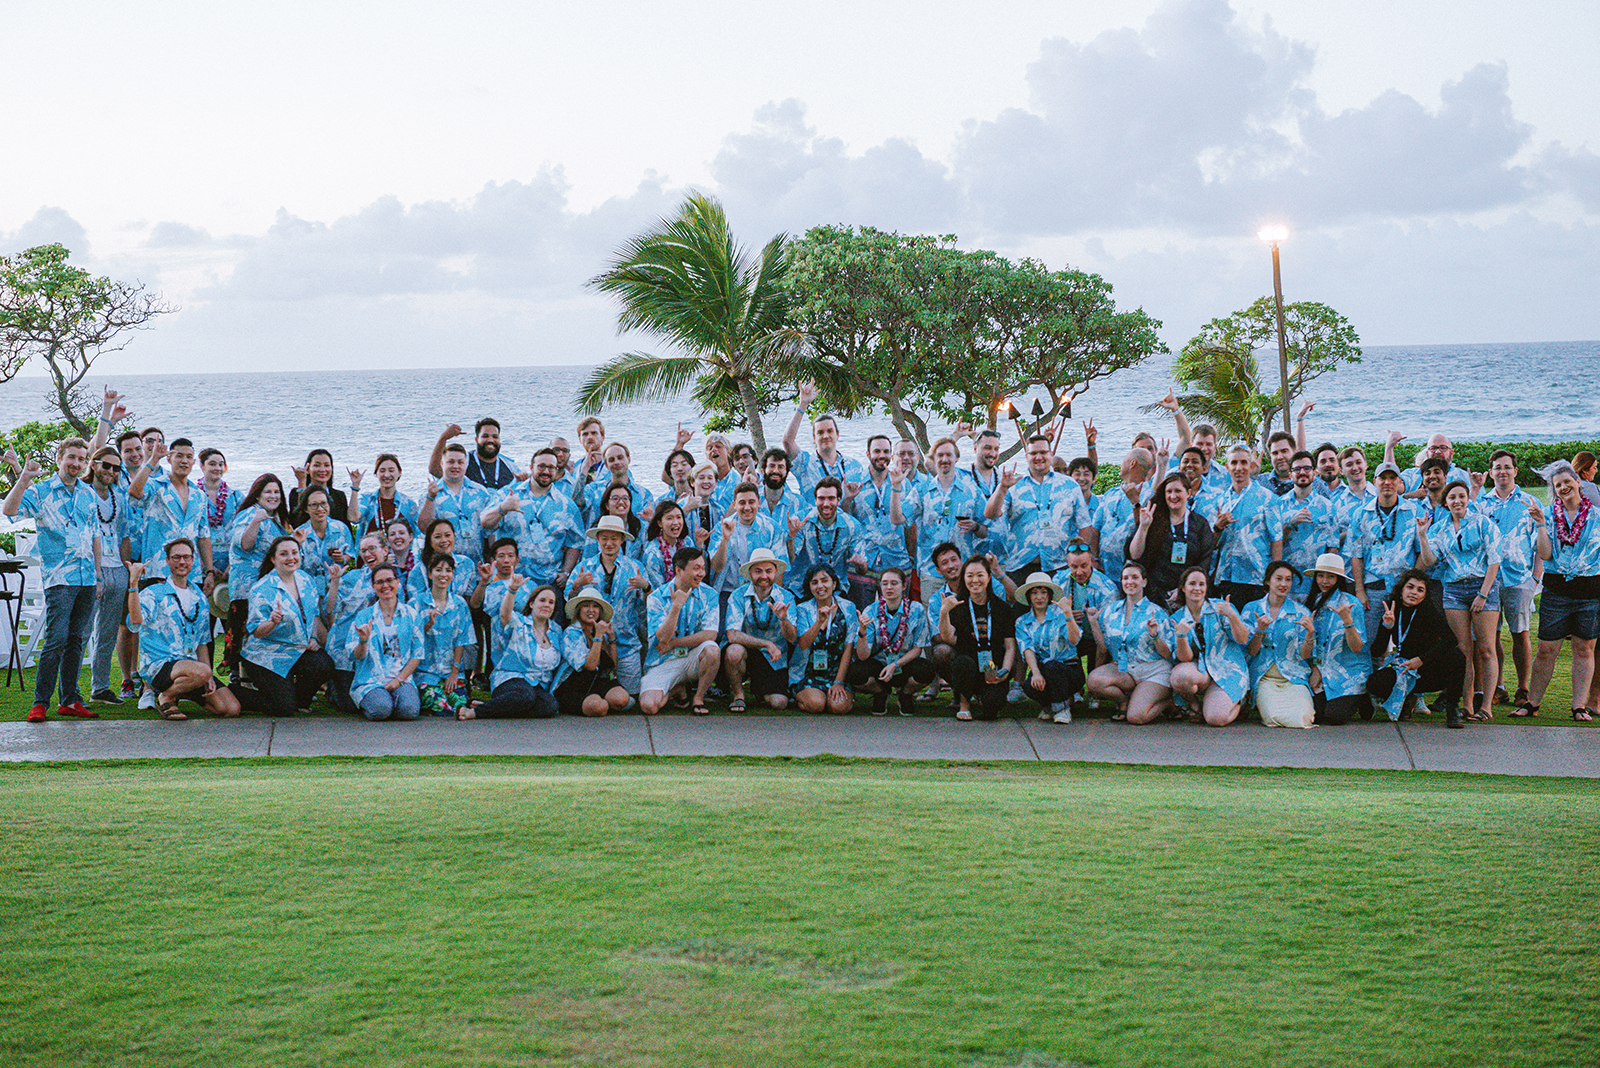 Thatgamecompany Company Retreat trip to Turtle Bay Resort on the North Shore of Hawaii in November 2022